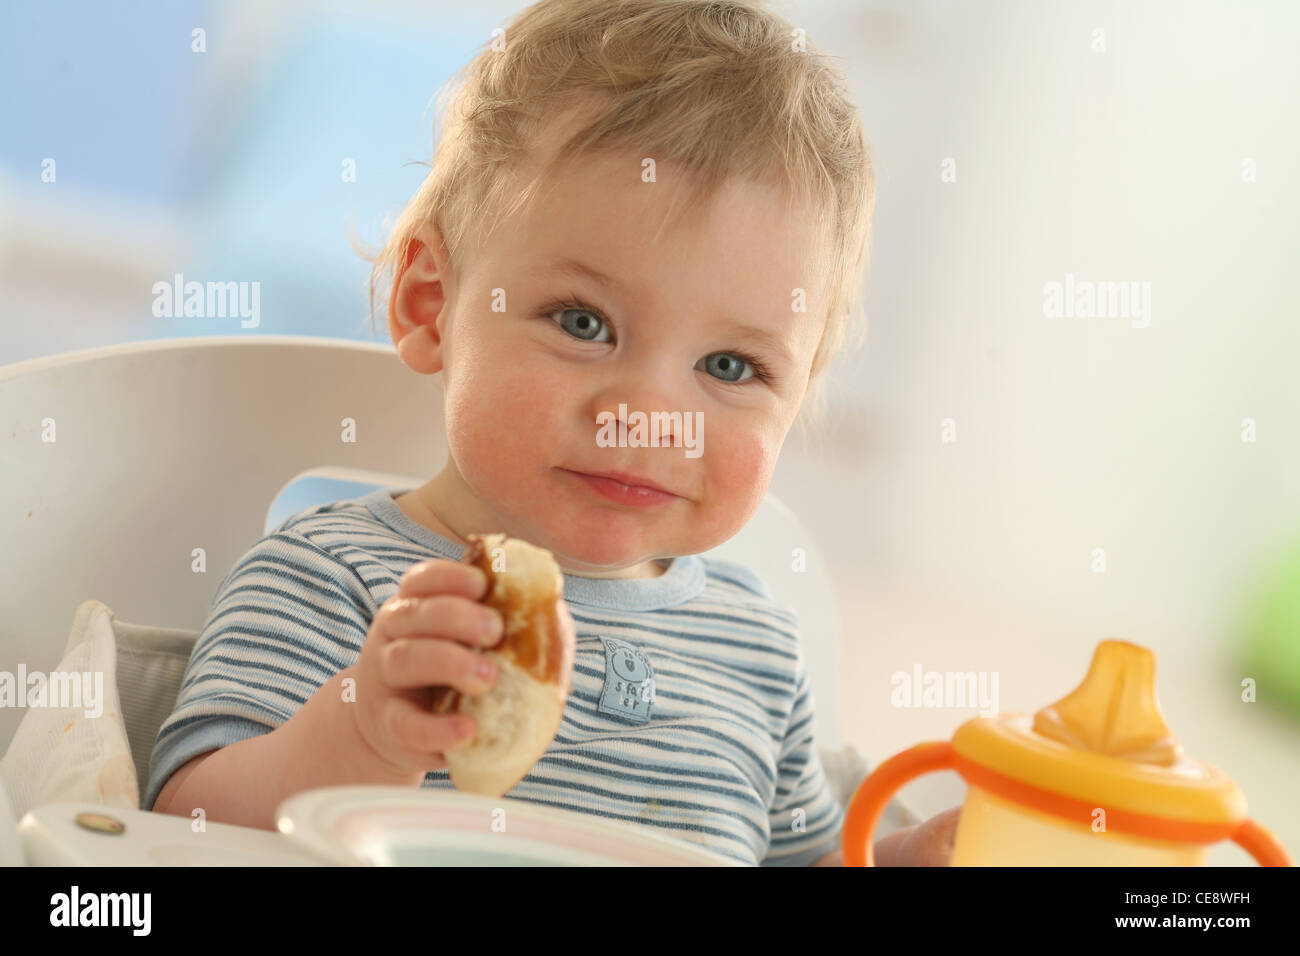 Baby eating at table Banque D'Images